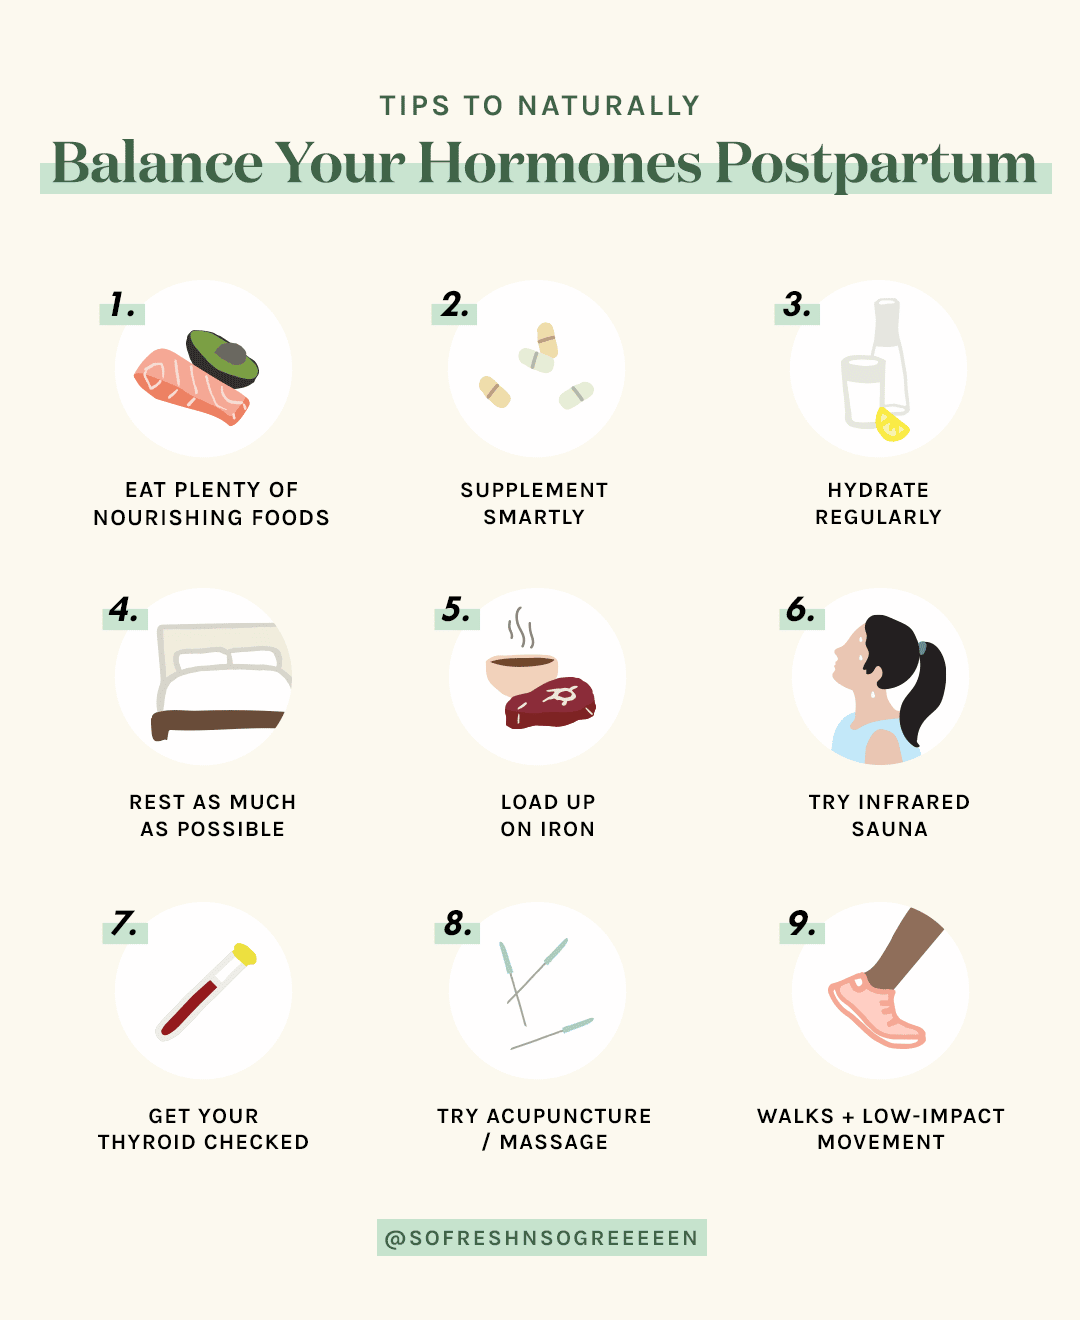 9 Tips To Naturally Balance Postpartum Hormones From 0